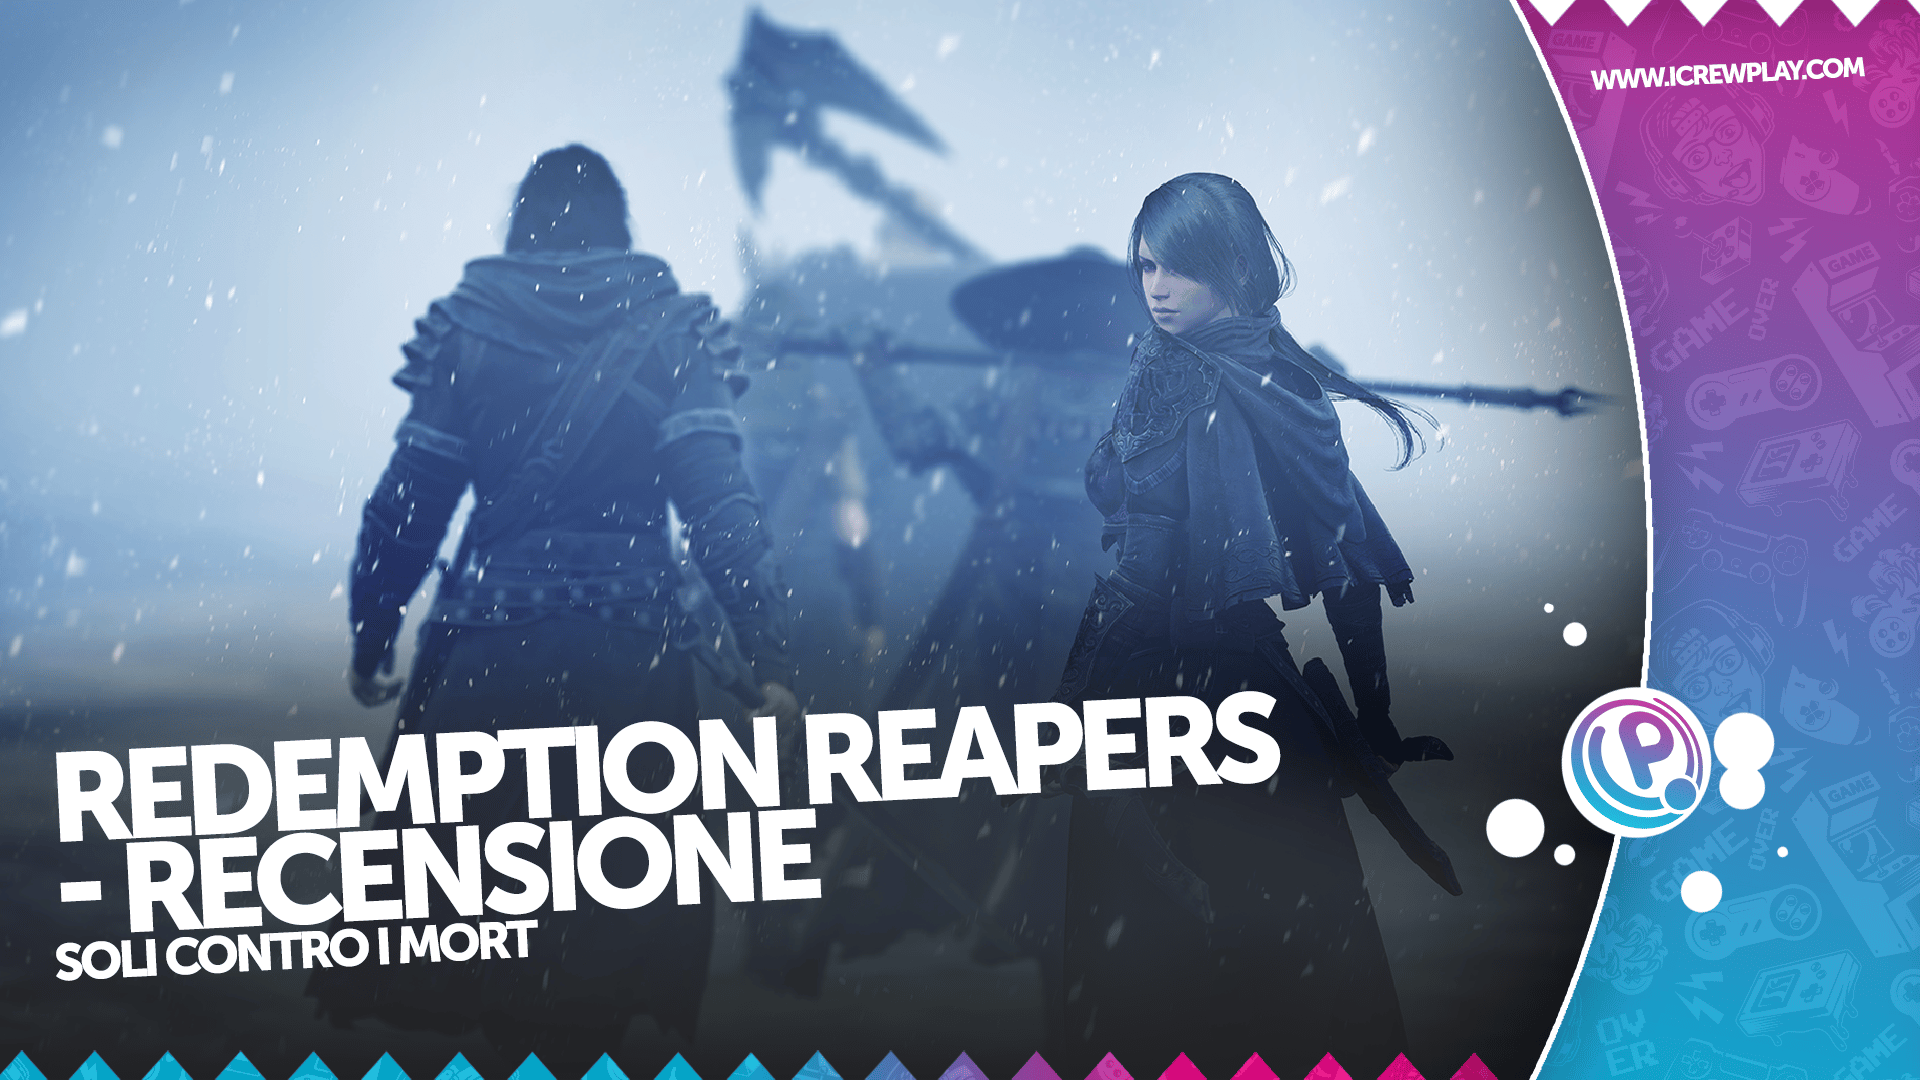 Redemption Reapers - Recensione per Nintendo Switch 2